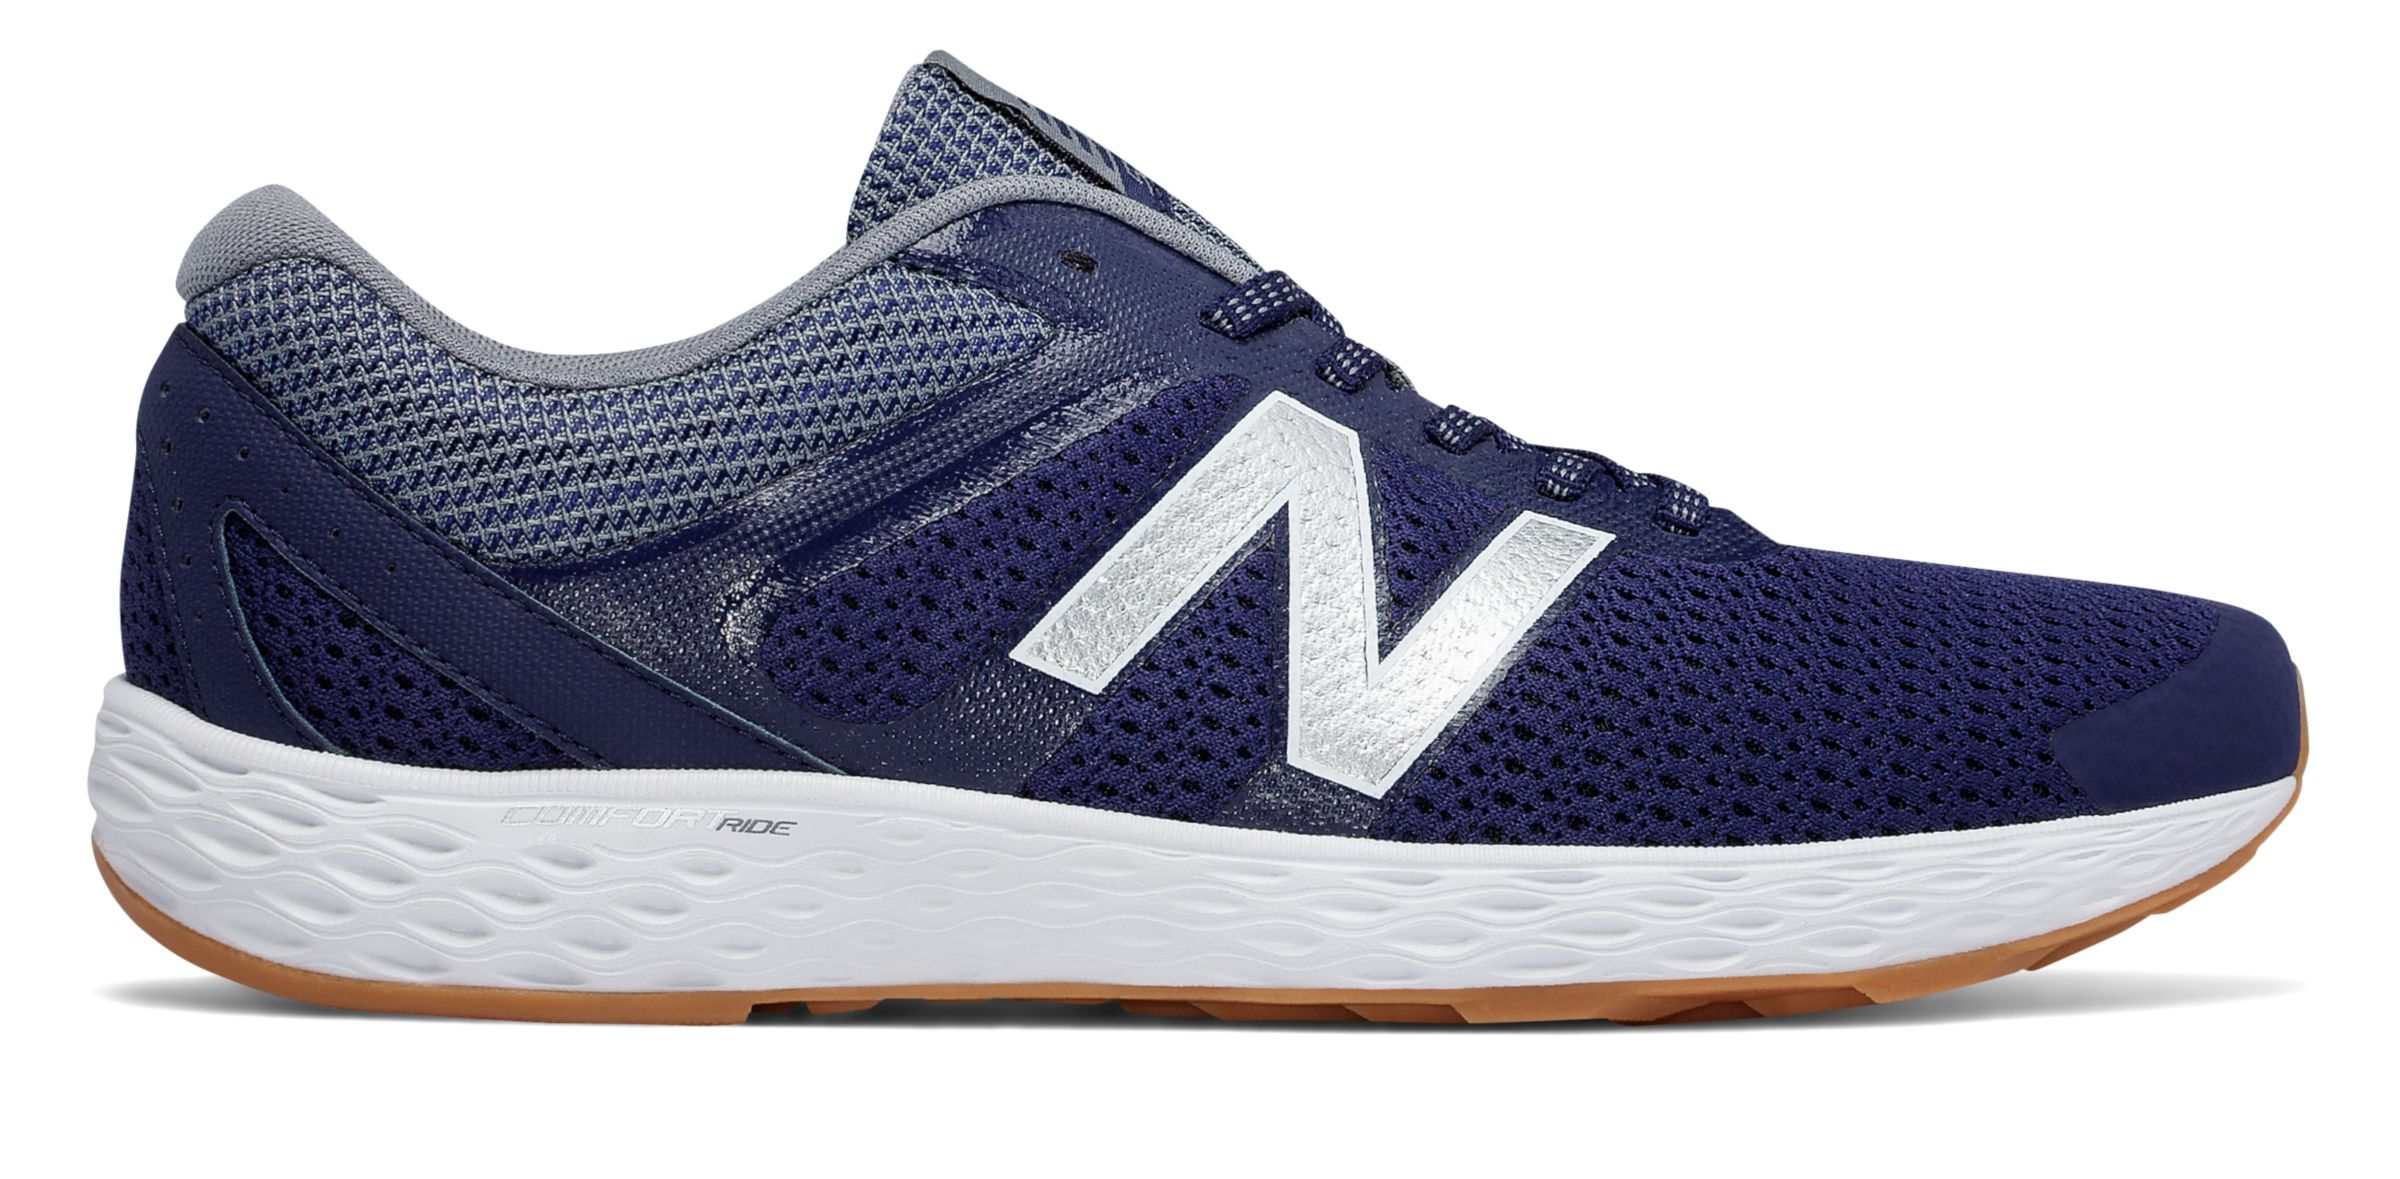 New Balance M520-V3 on Sale - Discounts Up to 59% Off on M520RN3 at Joe's New  Balance Outlet